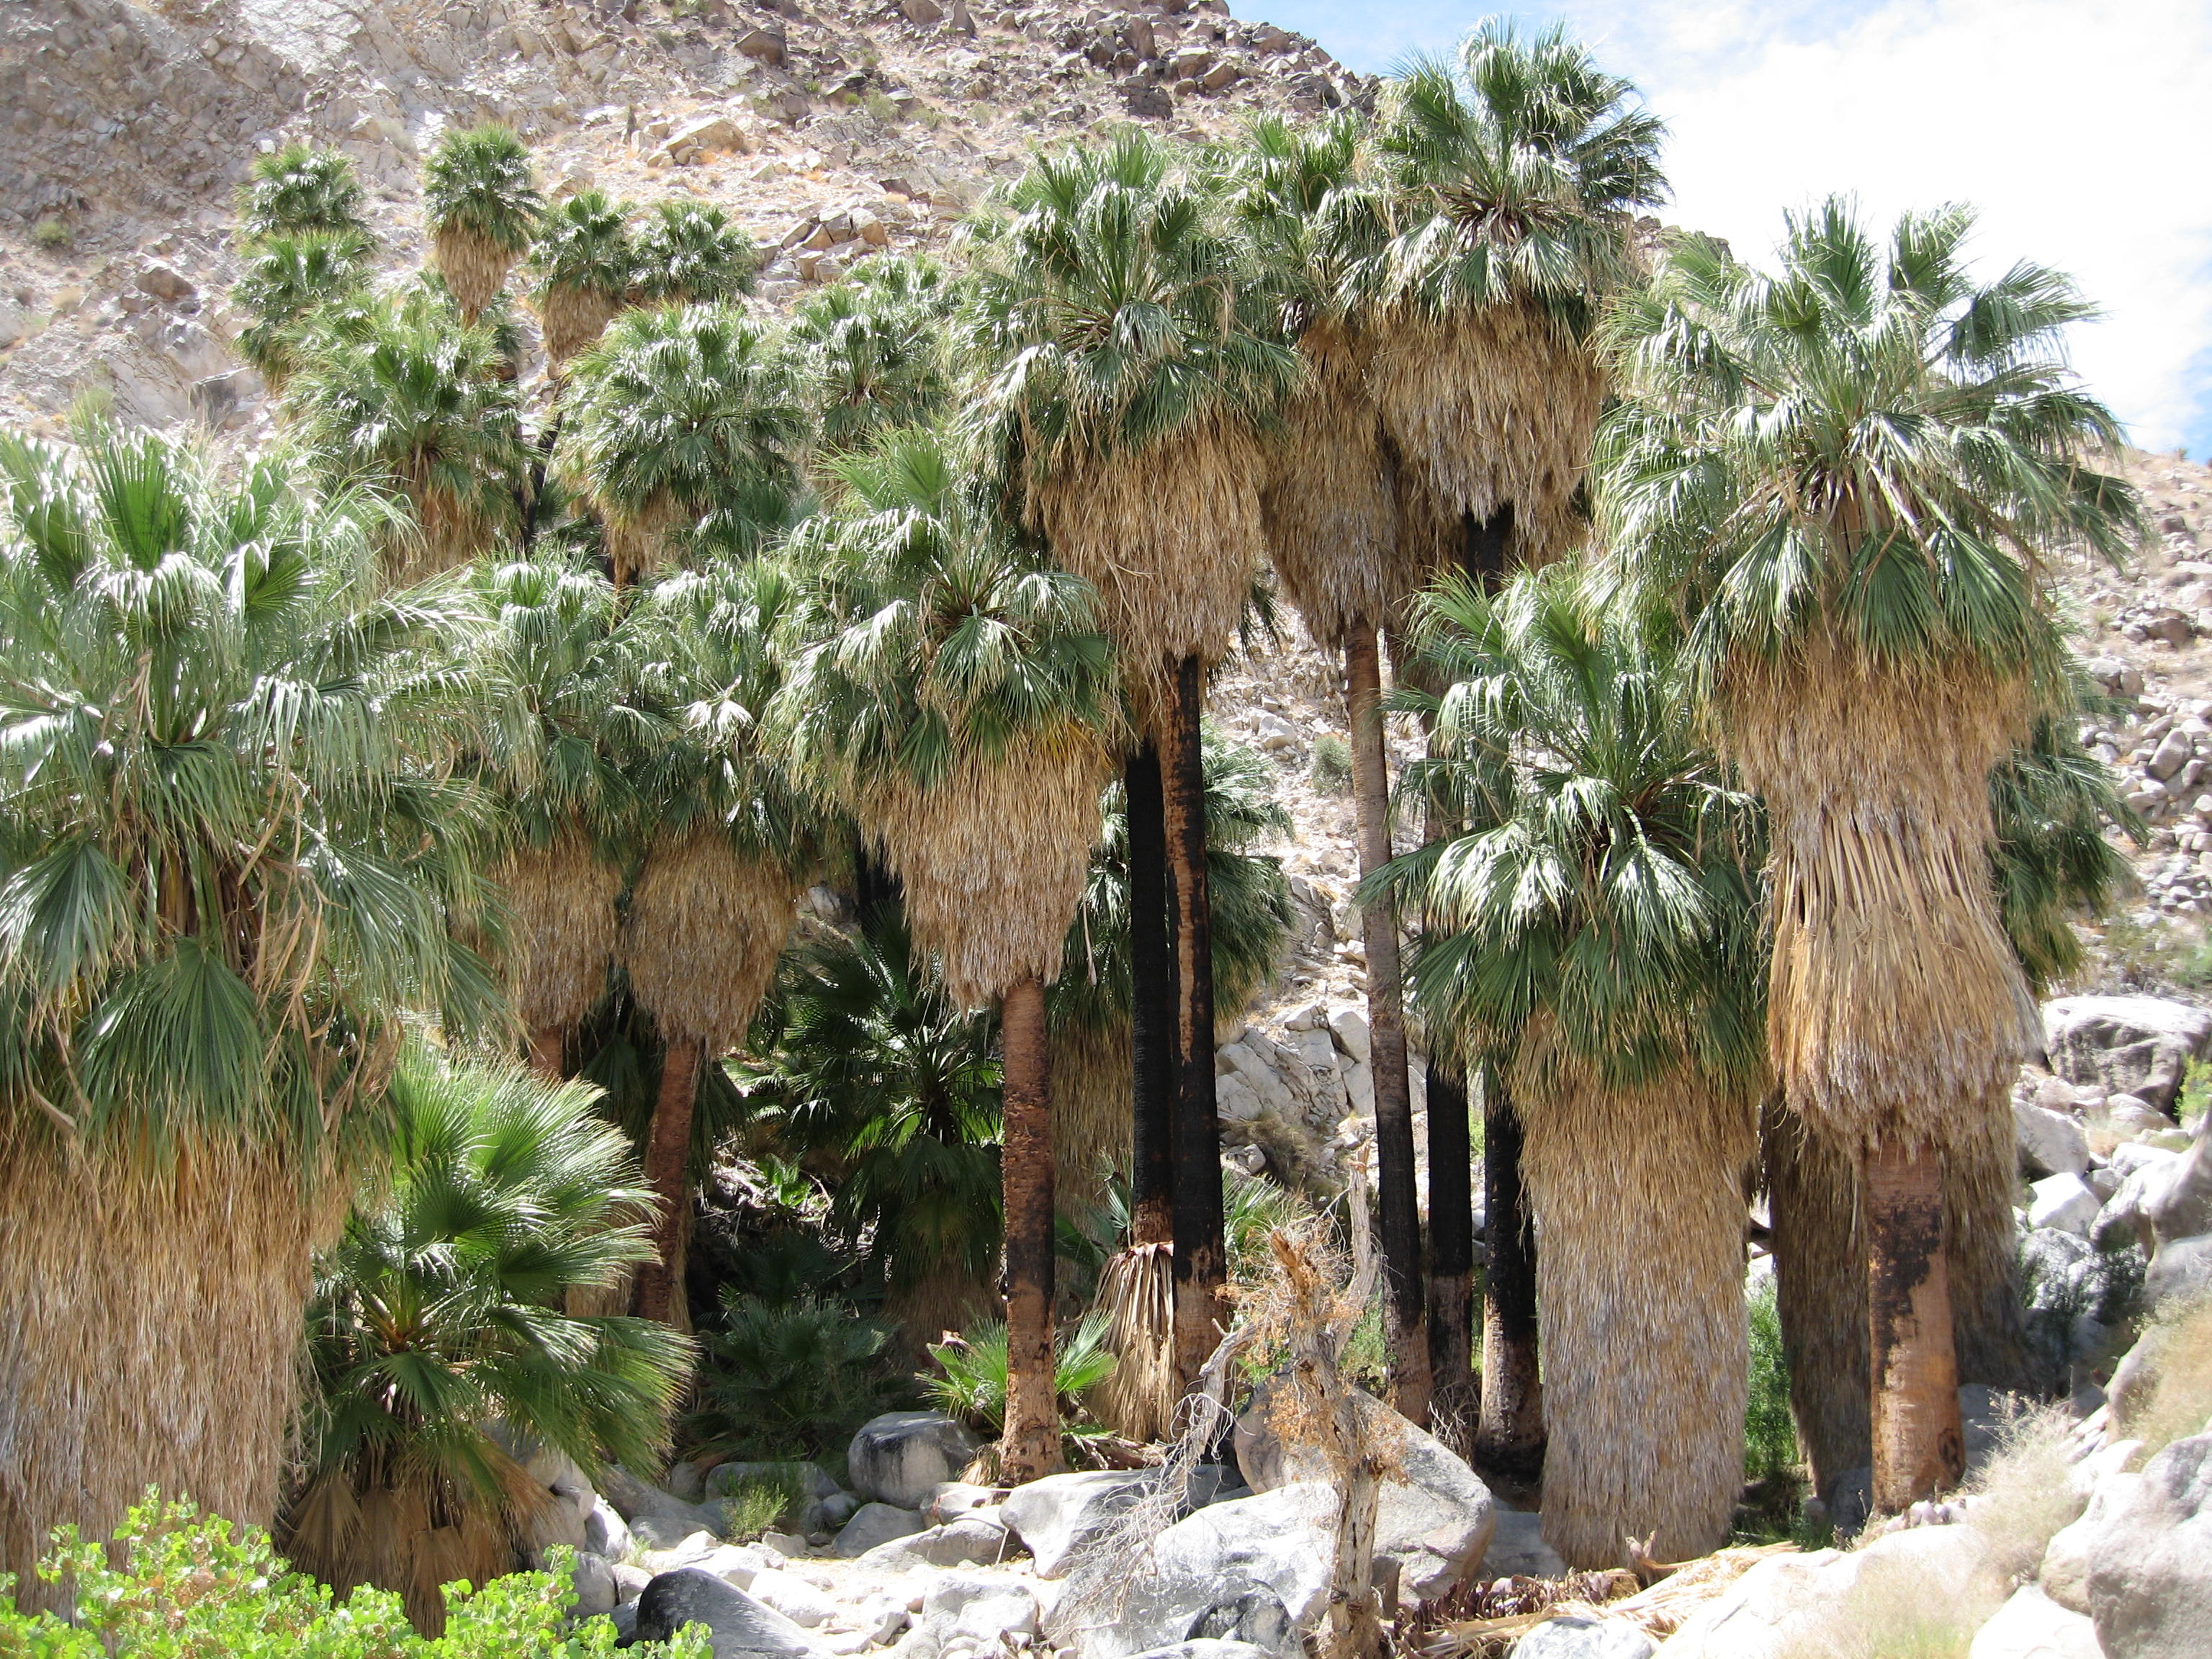 A cluster of palm trees in a desert